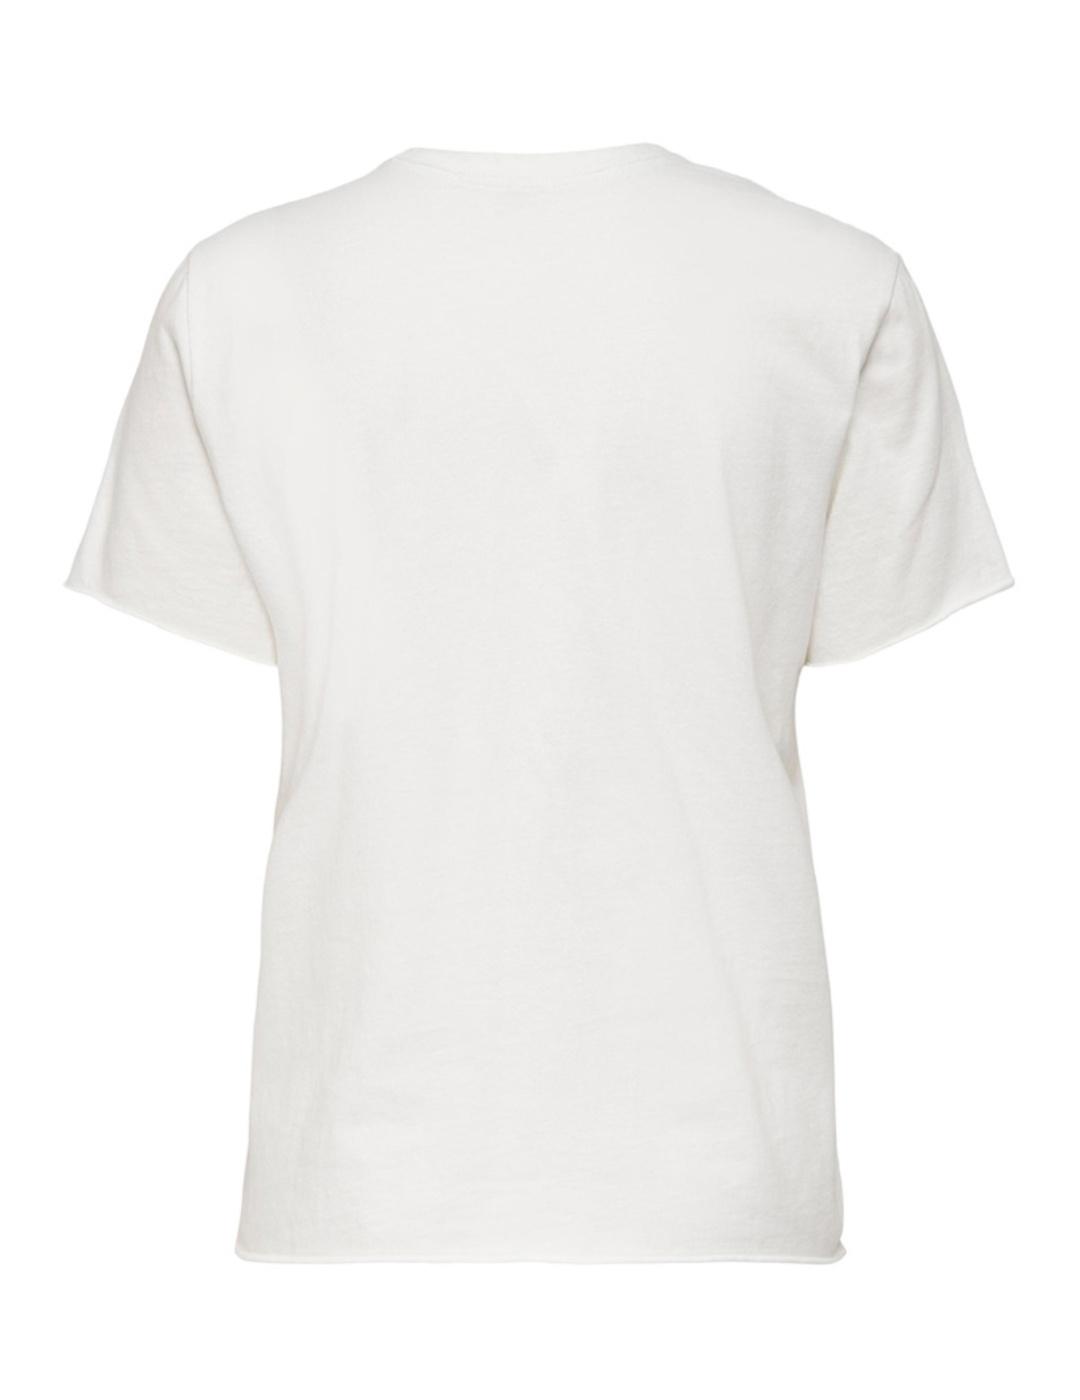 Camiseta Only Lucy blanca para mujer-b